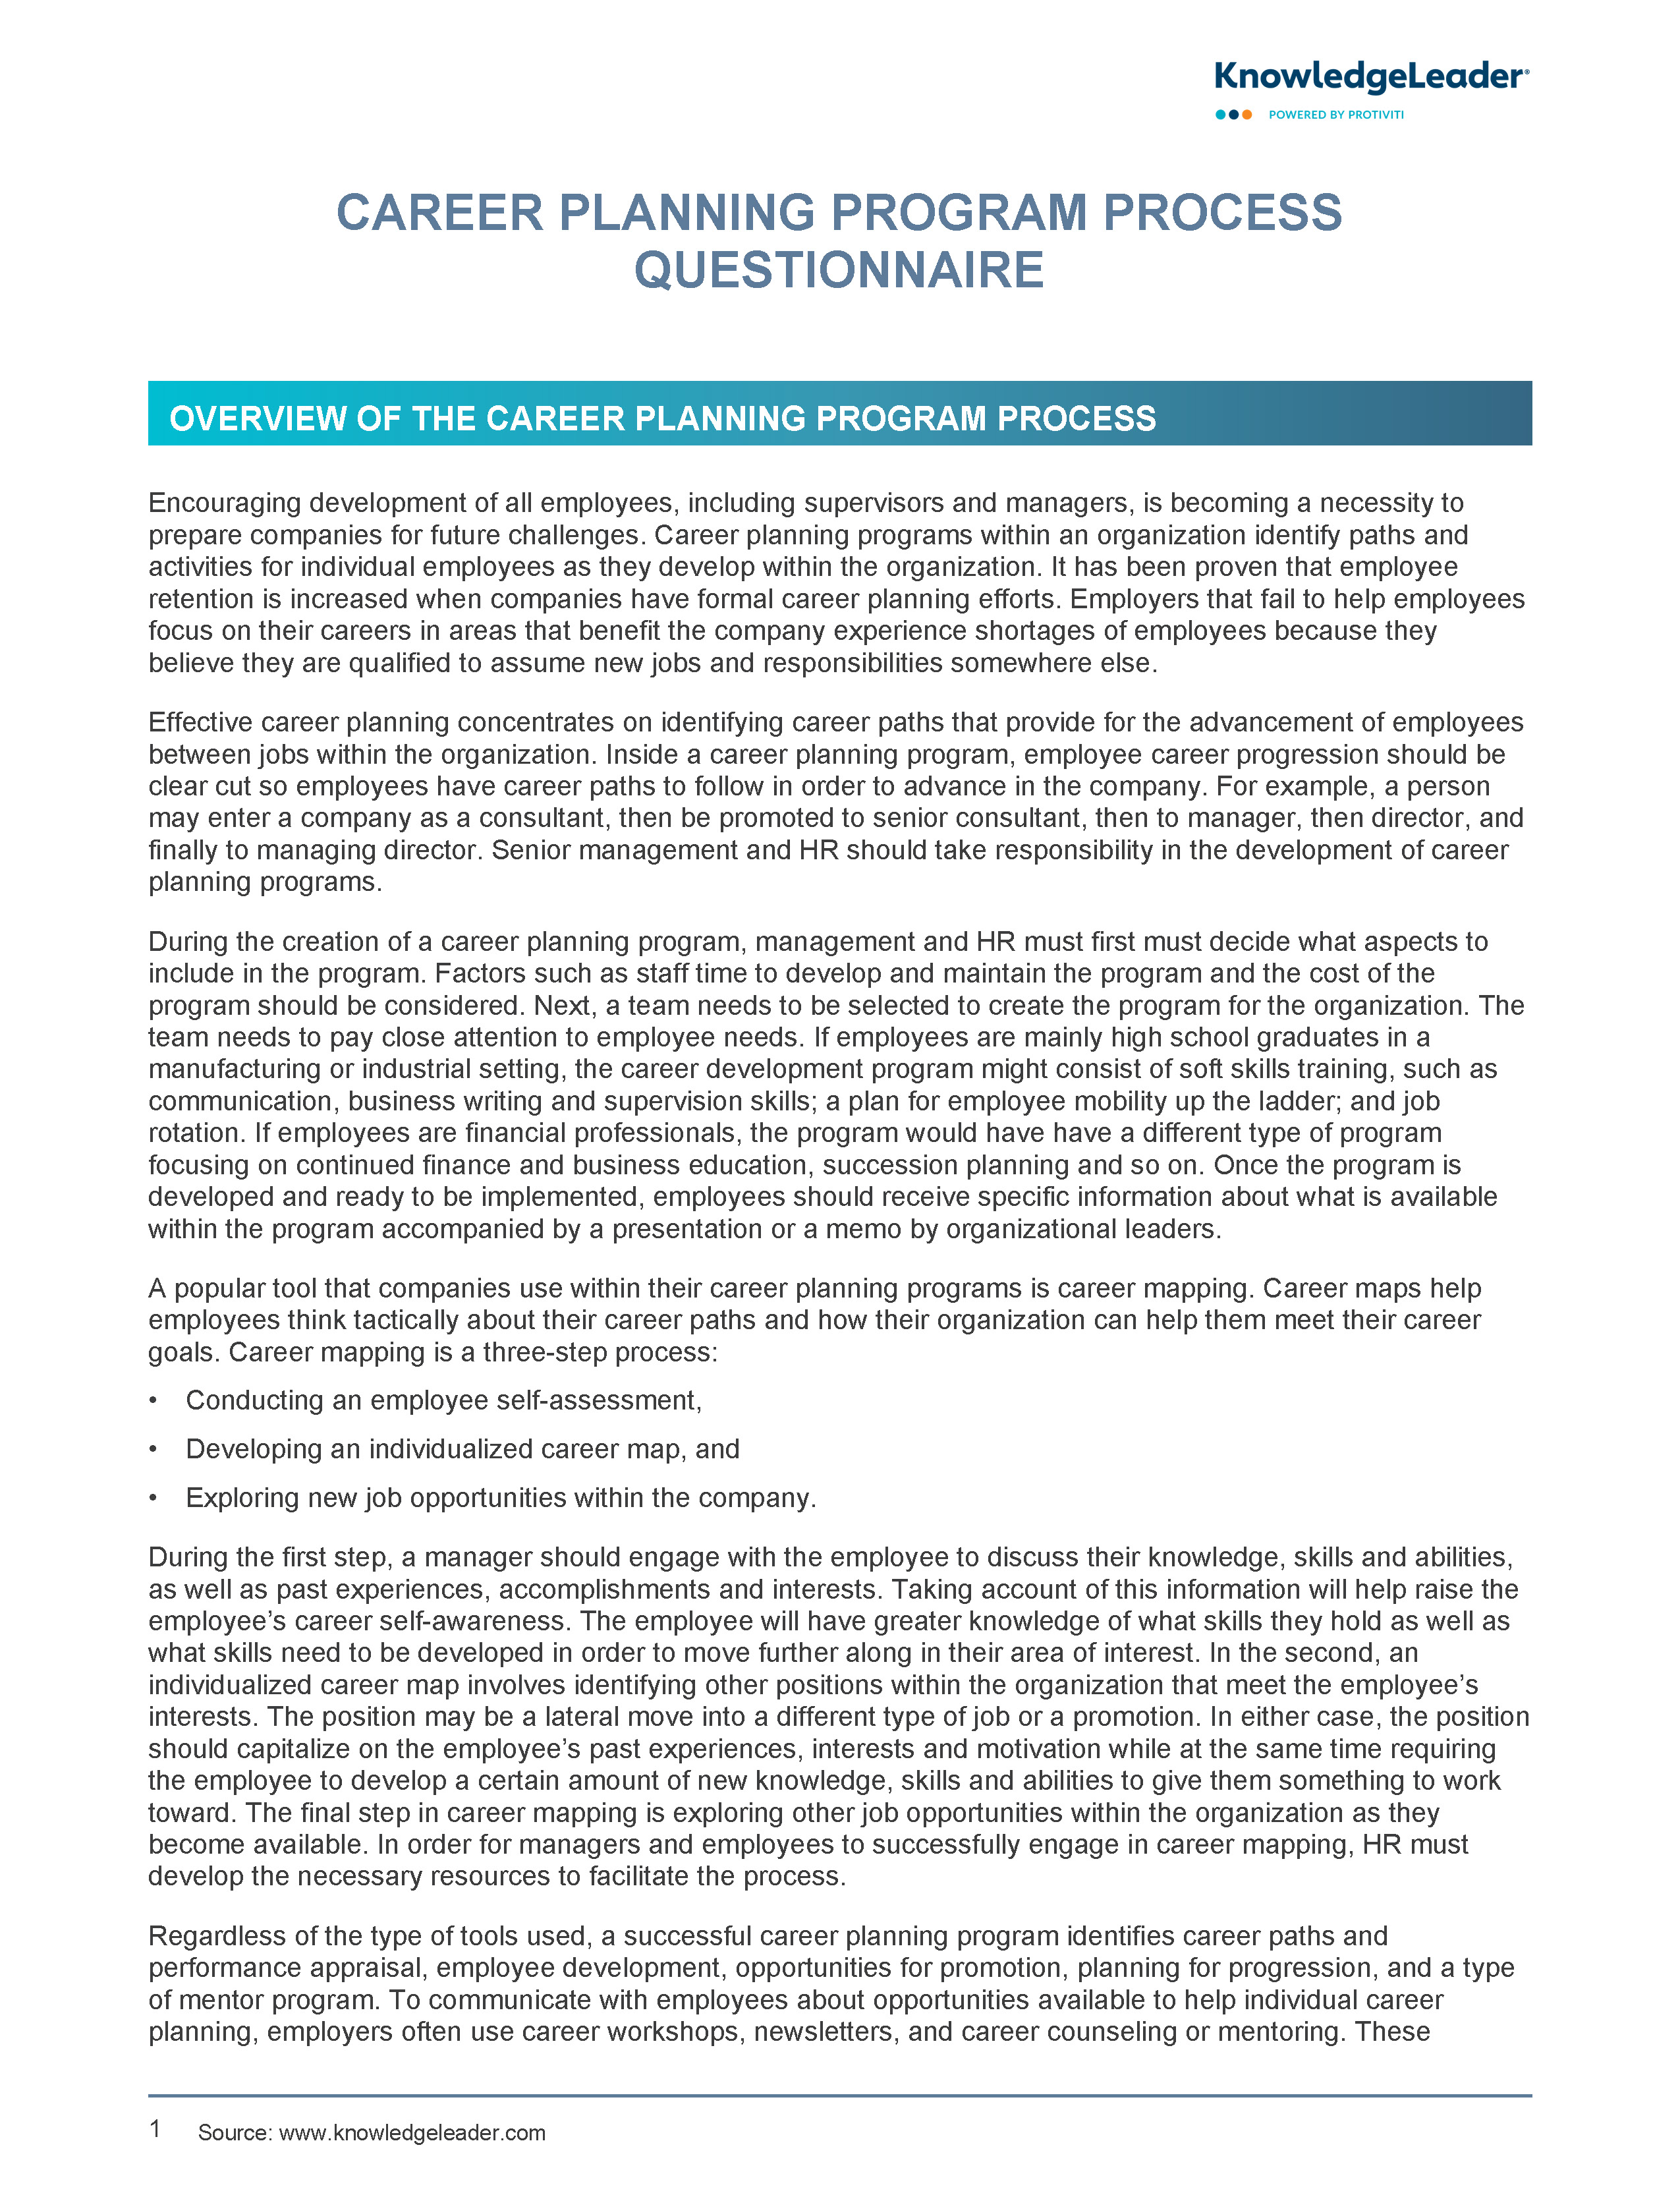 Screenshot of the first page of Career Planning Program Process Questionnaire